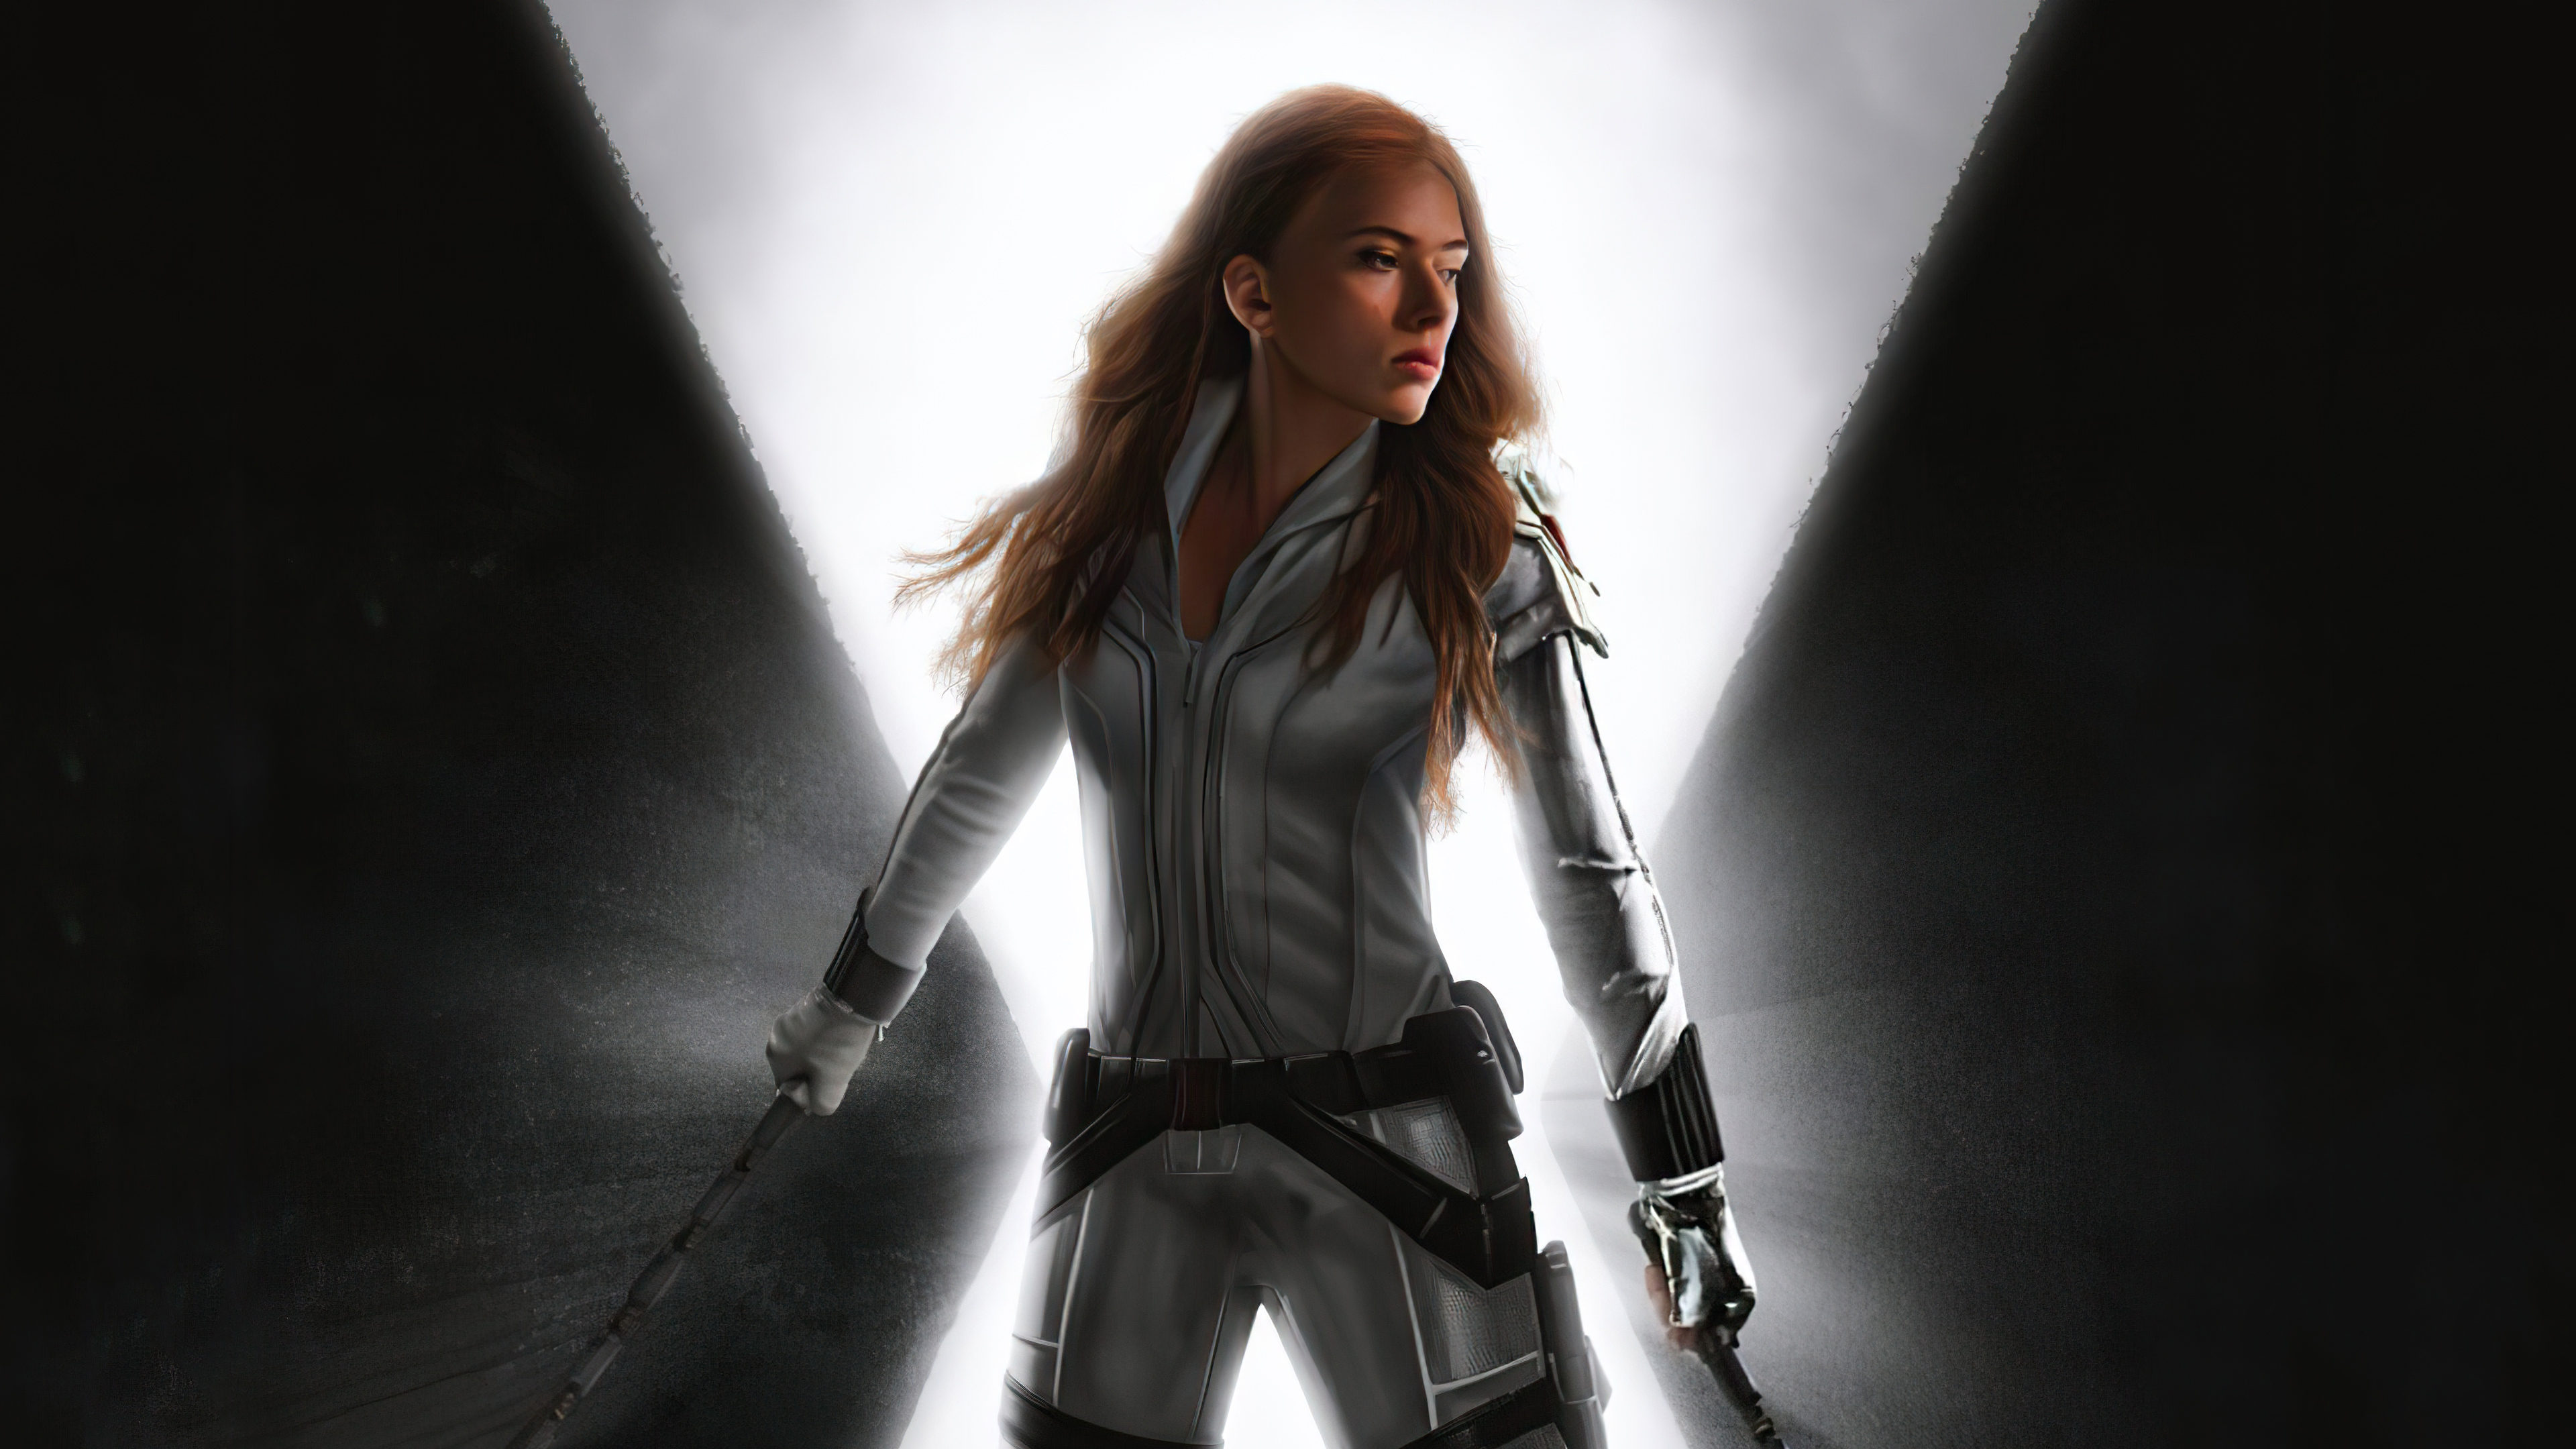 80+ Black Widow HD Wallpapers and Backgrounds